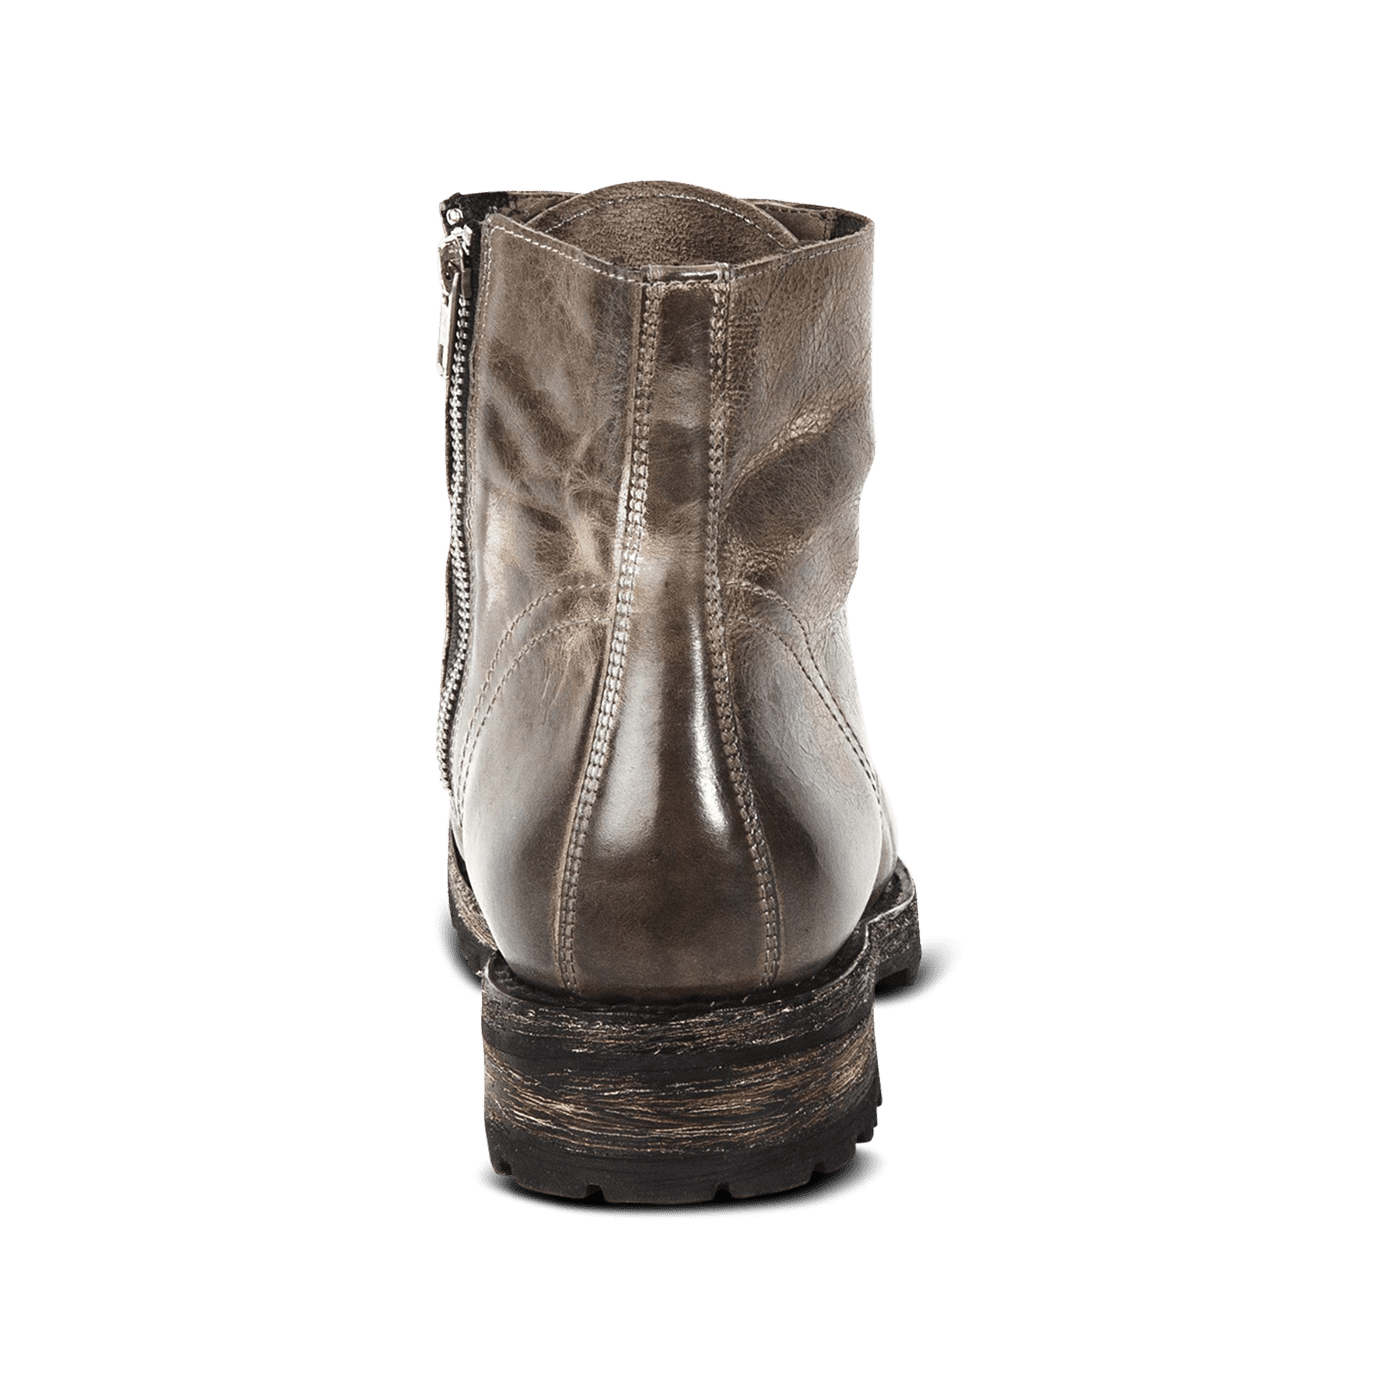 Back view showing wood wrapped heel with rubber tread on FREEBIRD men's Jax stone leather boot